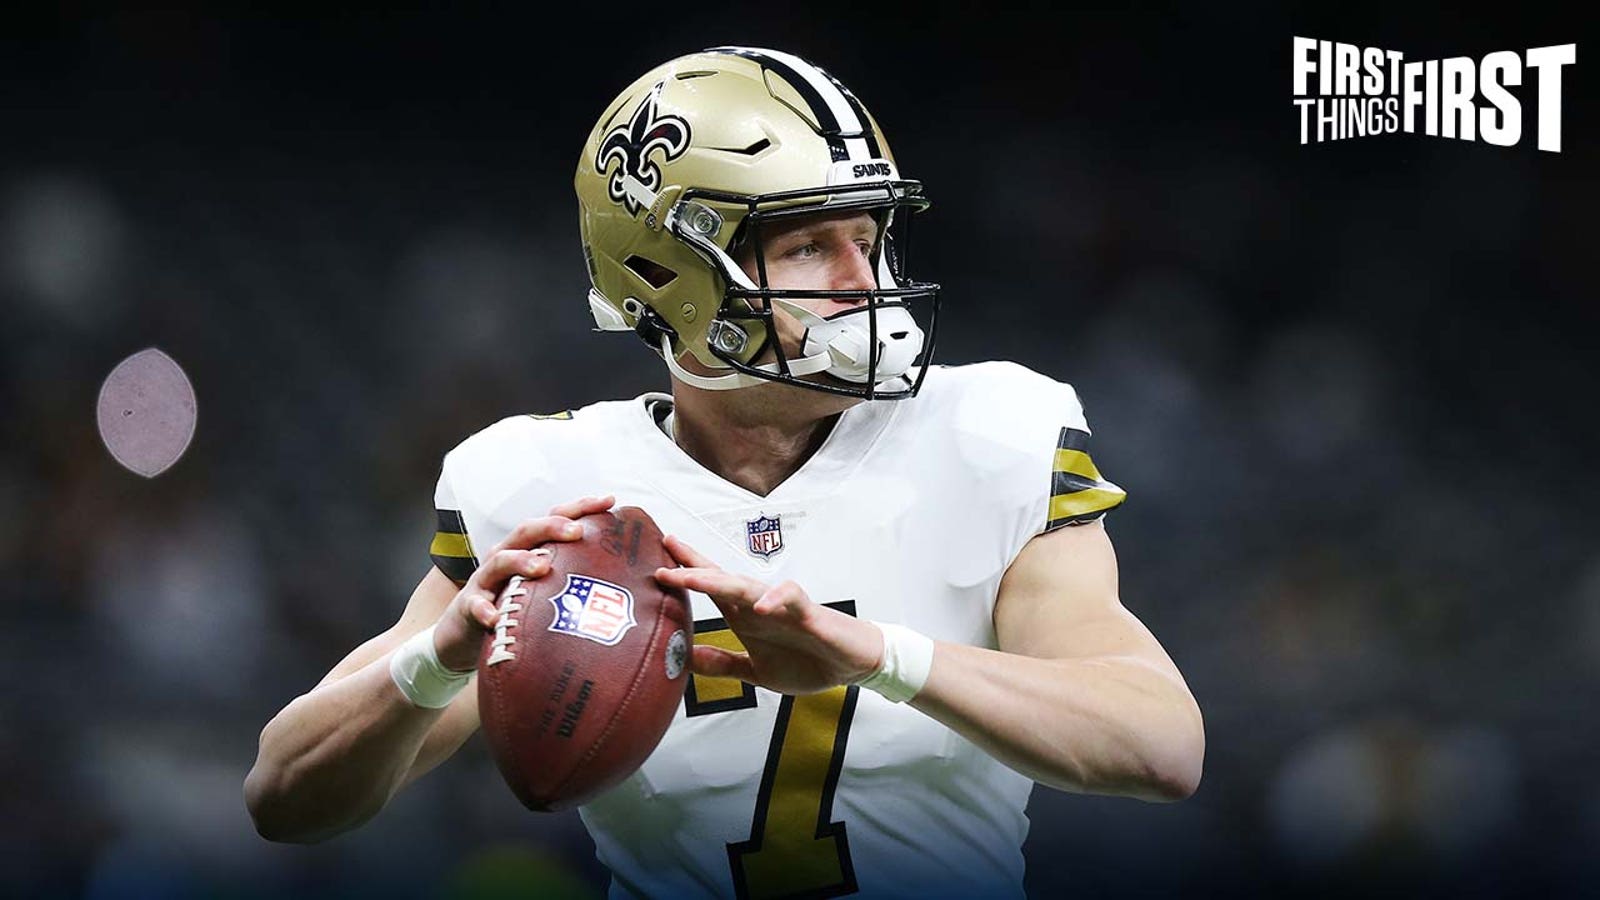 Nick Wright grades Taysom Hill's performance against the Cowboys I FIRST THINGS FIRST